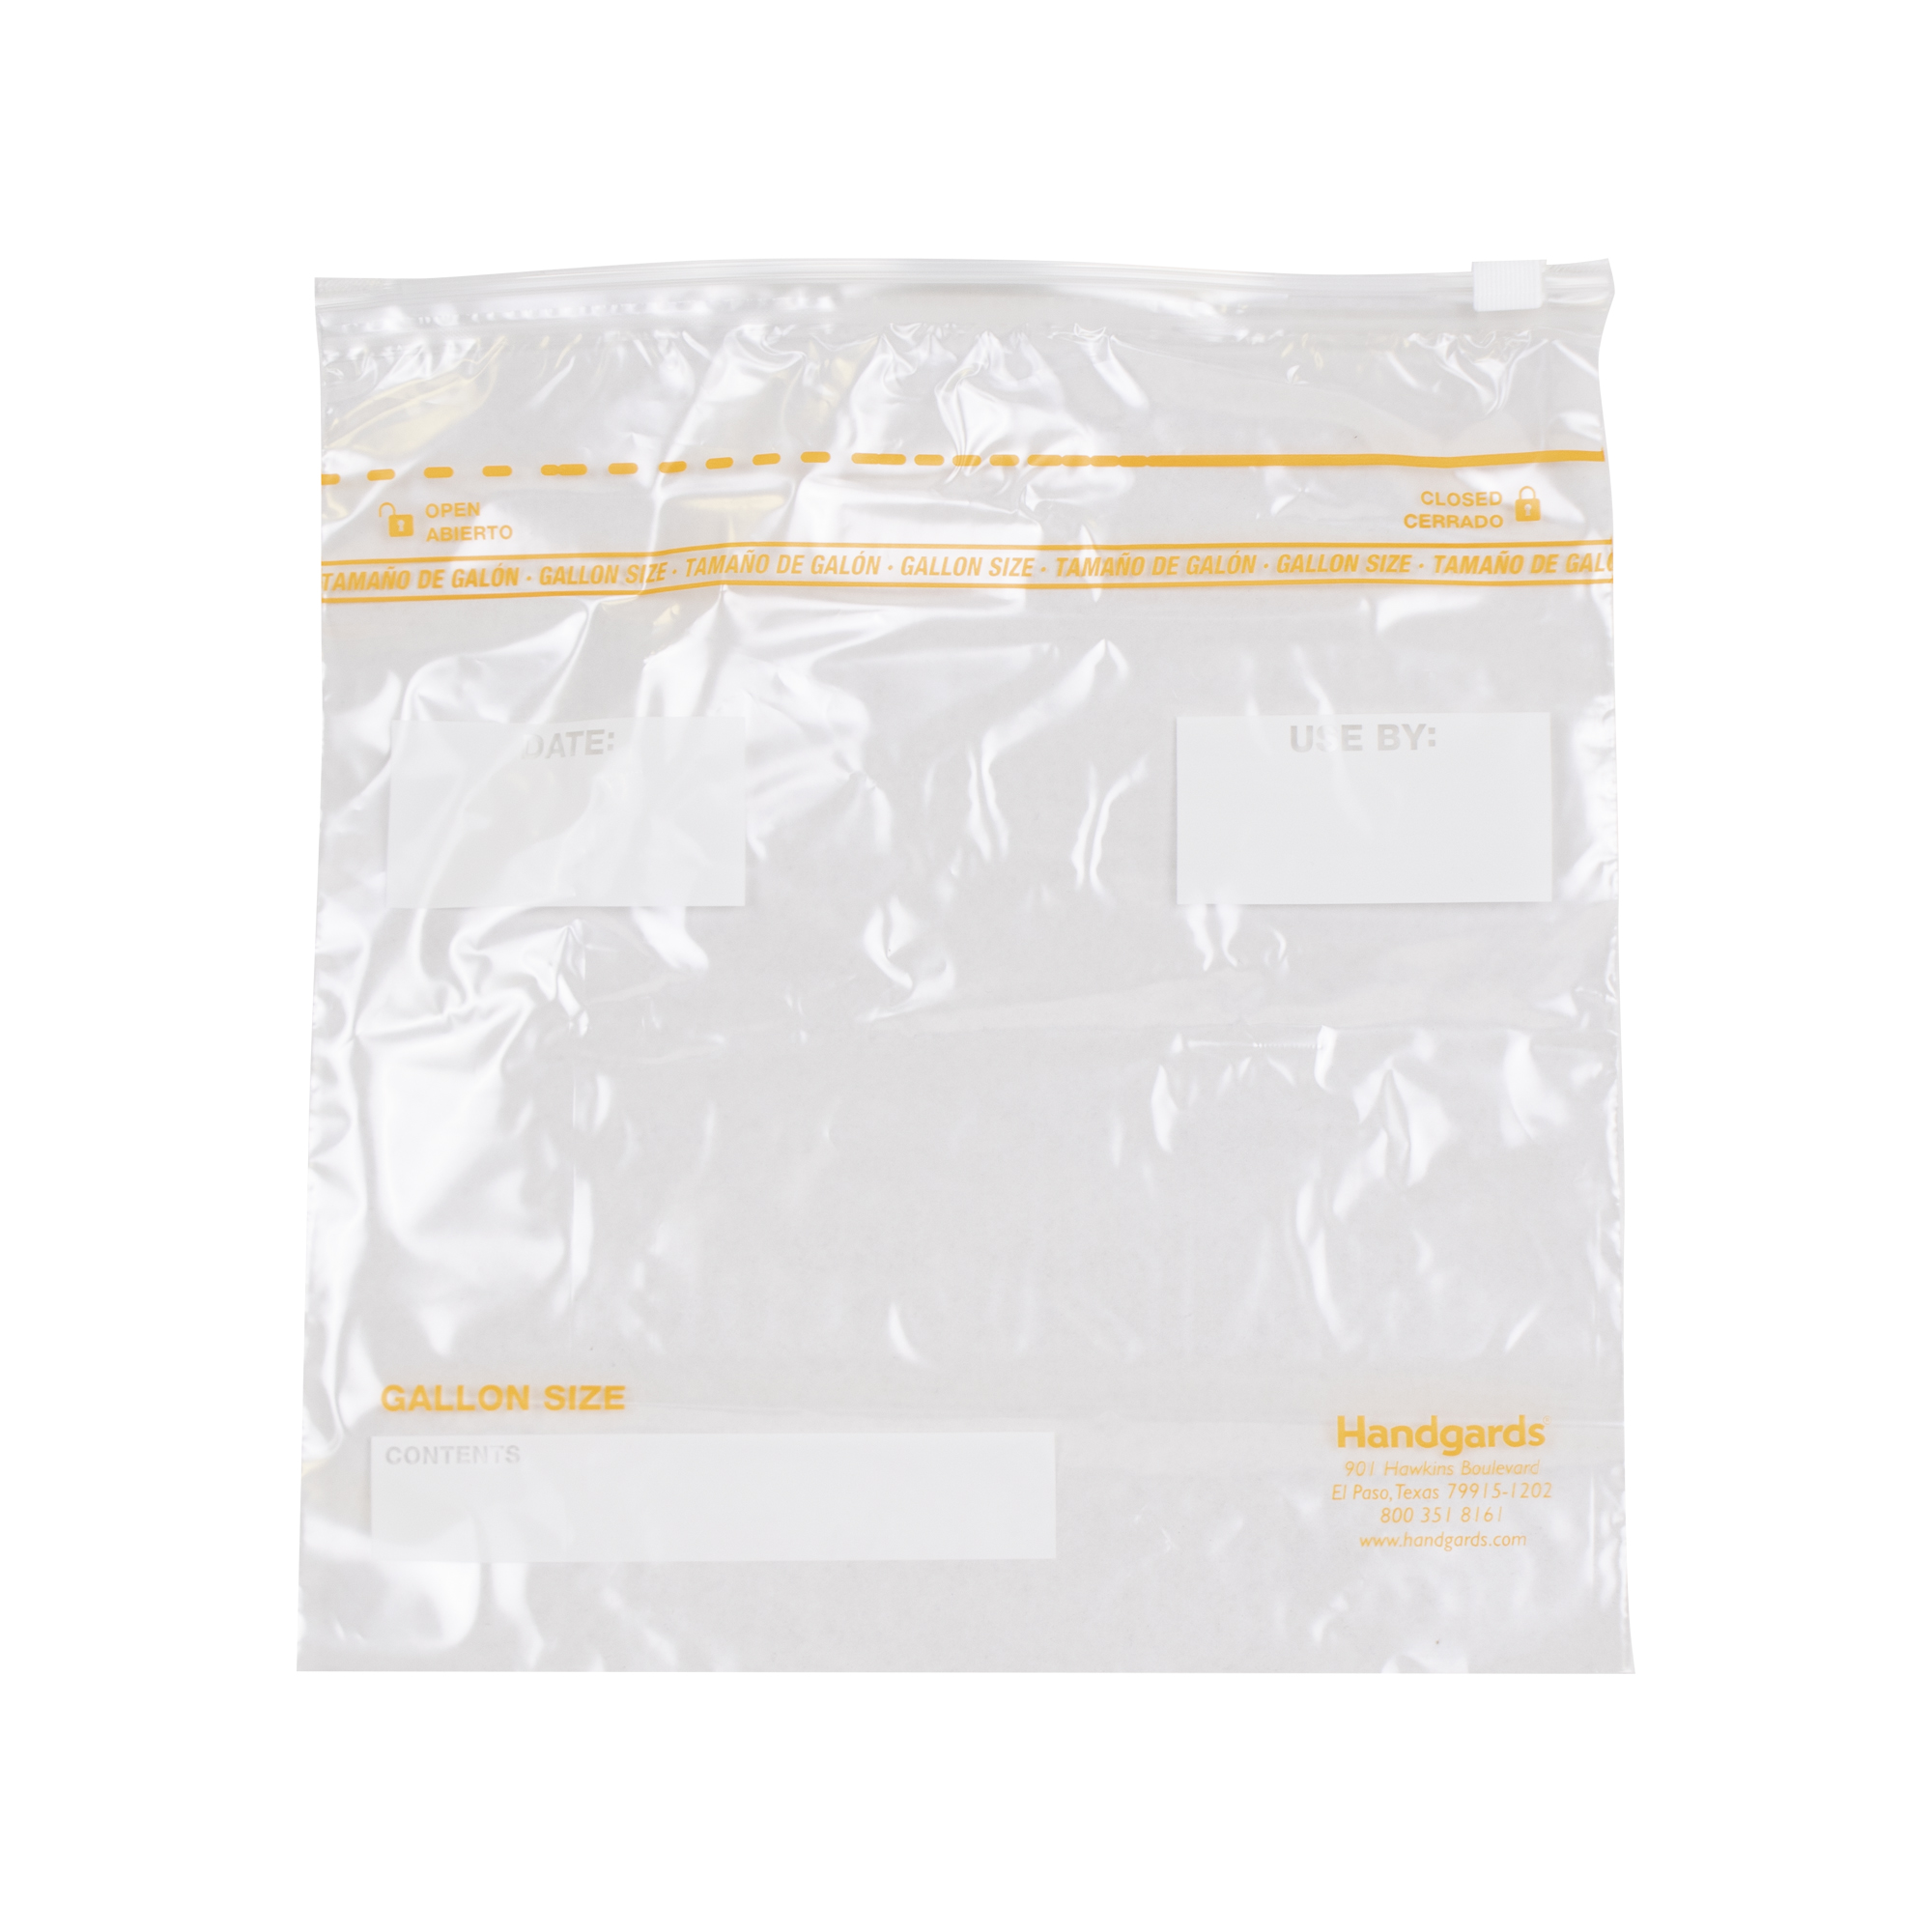 Zip Lock/Resealable Bags 9x12 or Gallon - PennFlo Imports Limited